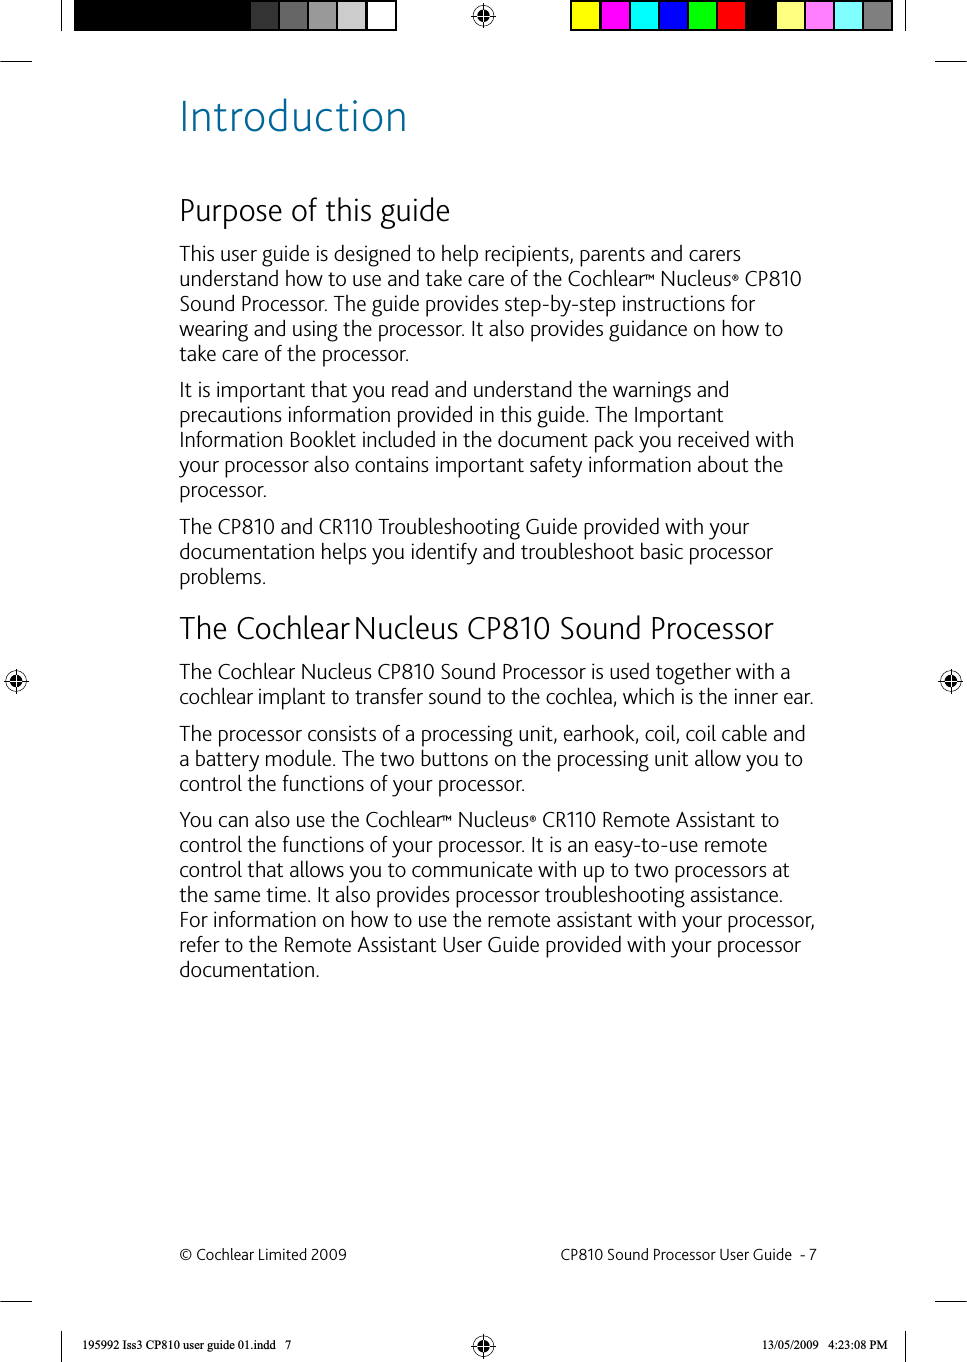 IntroductionPurpose of this guideThis user guide is designed to help recipients, parents and carers understand how to use and take care of the Cochlear™ Nucleus® CP810 Sound Processor. The guide provides step-by-step instructions for wearing and using the processor. It also provides guidance on how to take care of the processor. It is important that you read and understand the warnings and precautions information provided in this guide. The Important Information Booklet included in the document pack you received with your processor also contains important safety information about the processor.The CP810 and CR110 Troubleshooting Guide provided with your documentation helps you identify and troubleshoot basic processor problems.The Cochlear   Nucleus CP810  Sound ProcessorThe Cochlear Nucleus CP810 Sound Processor is used together with a cochlear implant to transfer sound to the cochlea, which is the inner ear. The processor consists of a processing unit, earhook, coil, coil cable and a battery module. The two buttons on the processing unit allow you to control the functions of your processor. You can also use the Cochlear™ Nucleus® CR110 Remote Assistant to control the functions of your processor. It is an easy-to-use remote control that allows you to communicate with up to two processors at the same time. It also provides processor troubleshooting assistance. For information on how to use the remote assistant with your processor, refer to the Remote Assistant User Guide provided with your processor documentation. ©  Cochlear Limited 2009  CP810 Sound Processor User Guide  - 7195992 Iss3 CP810 user guide 01.indd   7 13/05/2009   4:23:08 PM